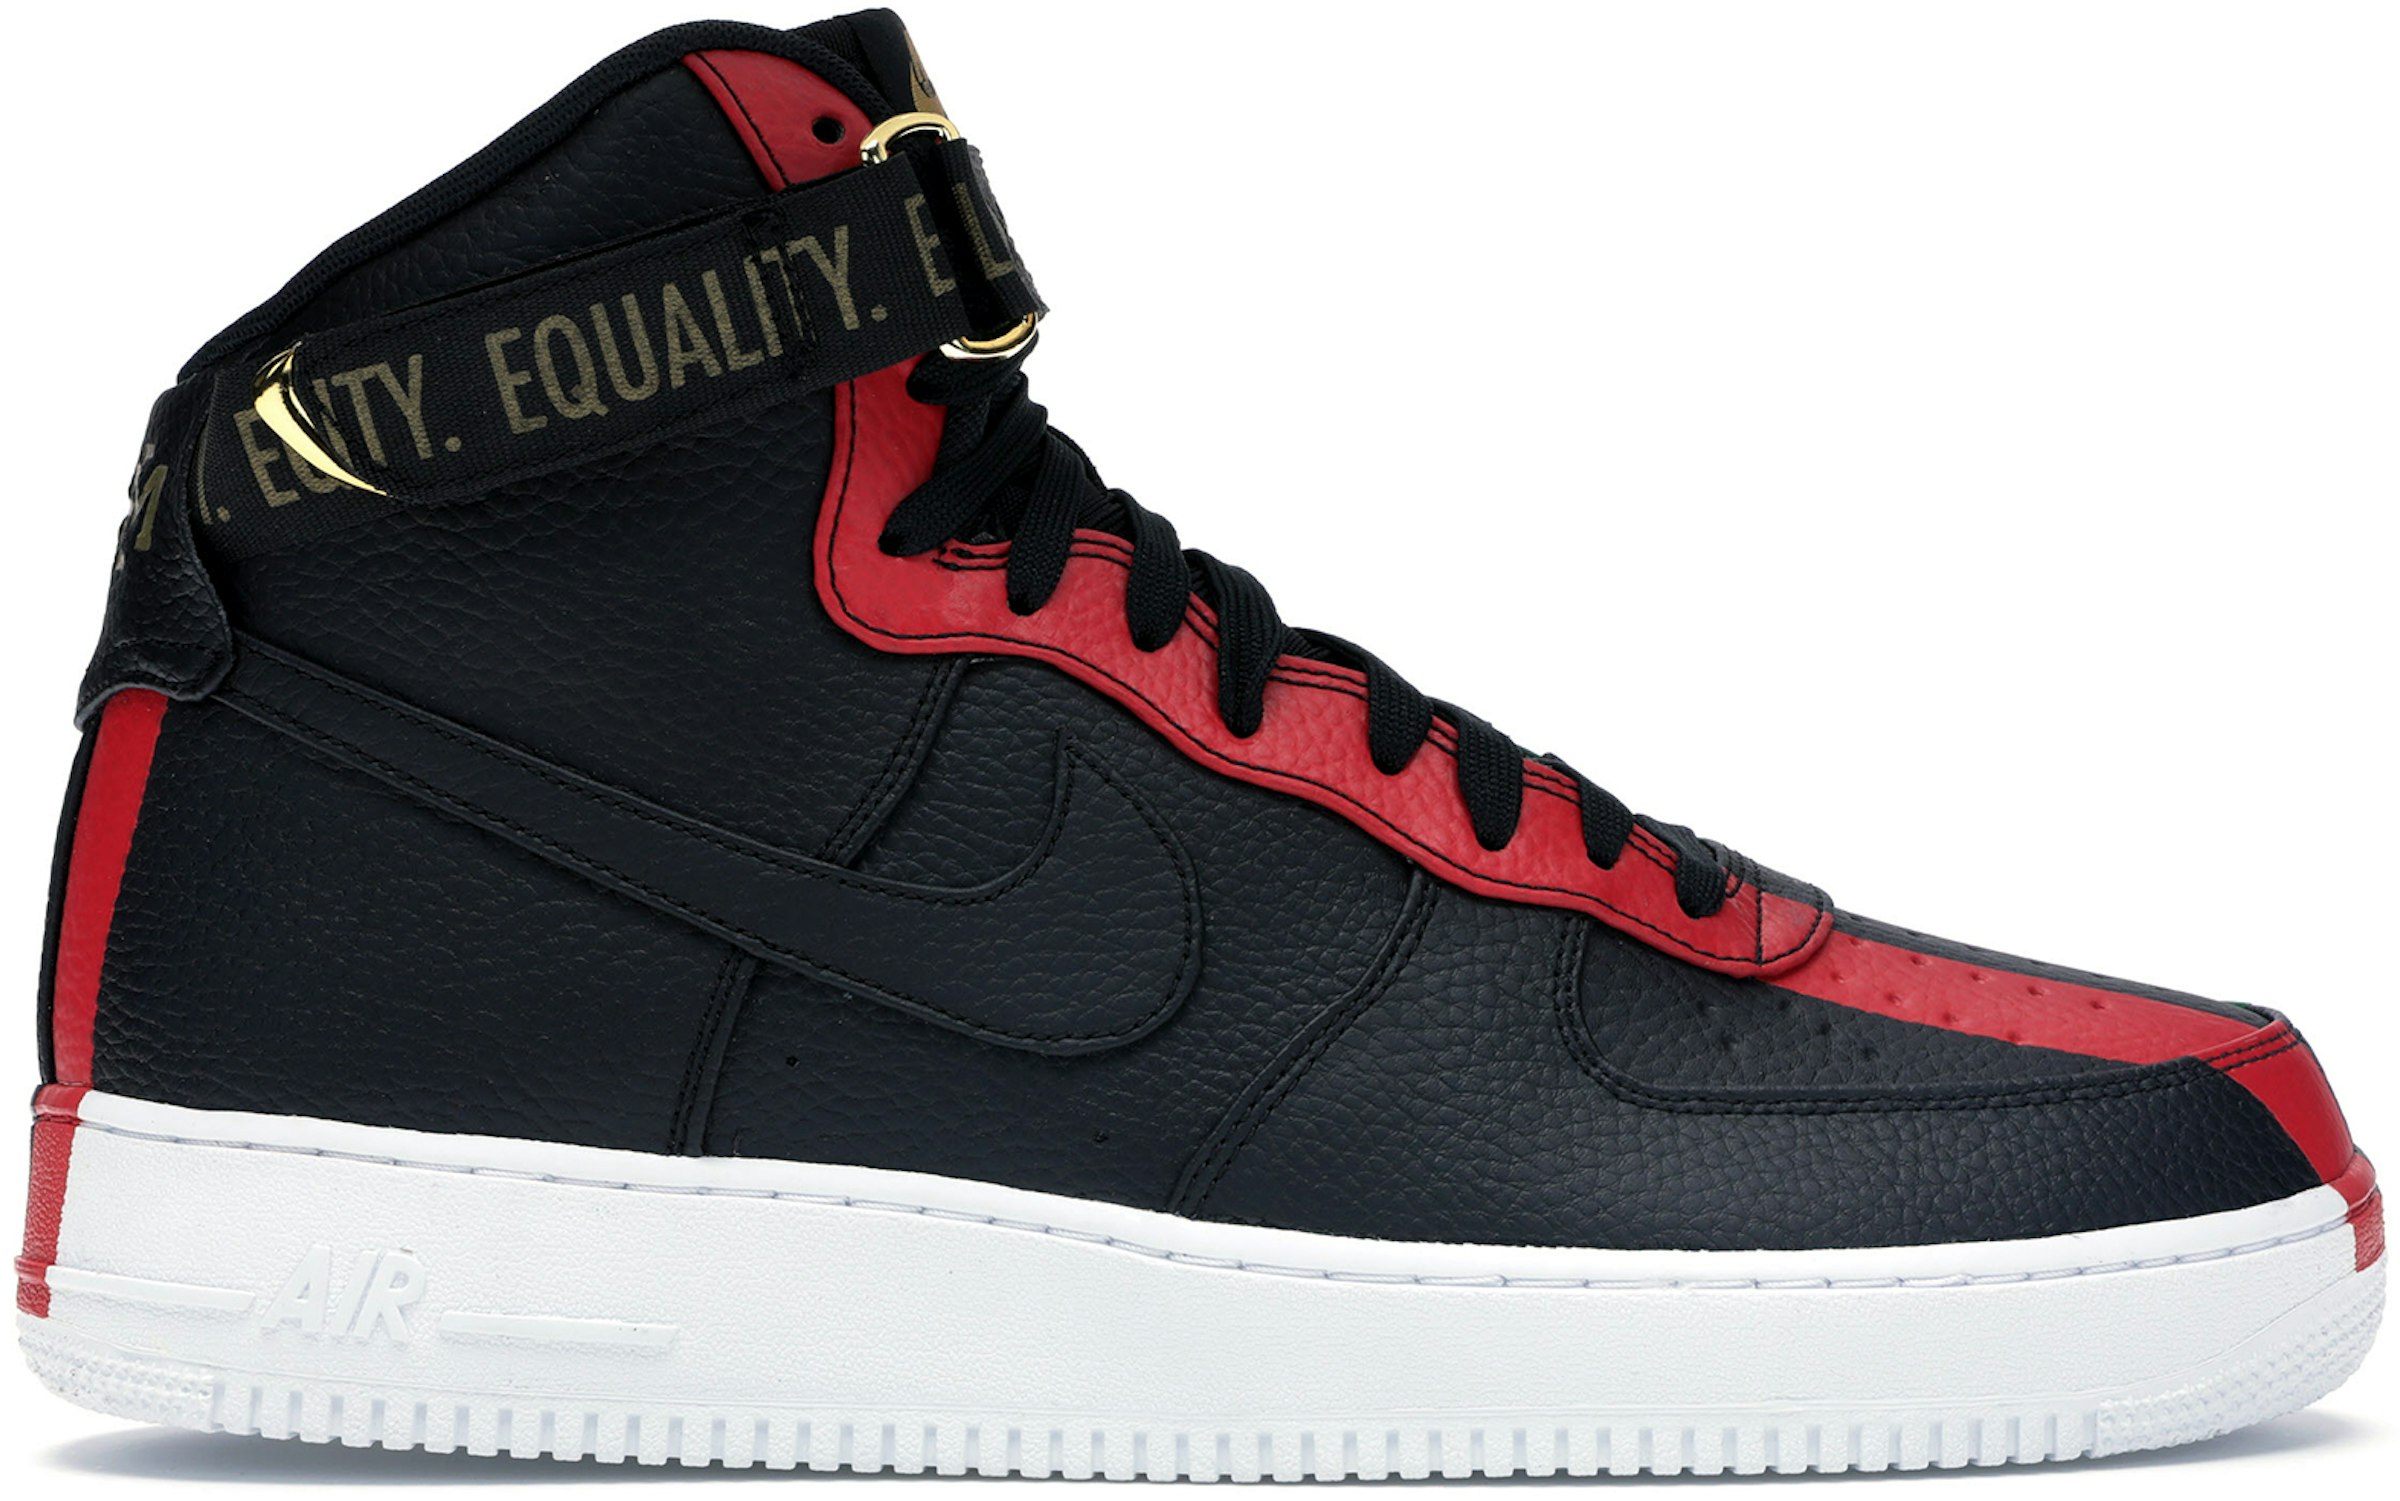 Patria queso Pasteles Nike Air Force 1 High Black History Month (2018) - 836227-002 - US